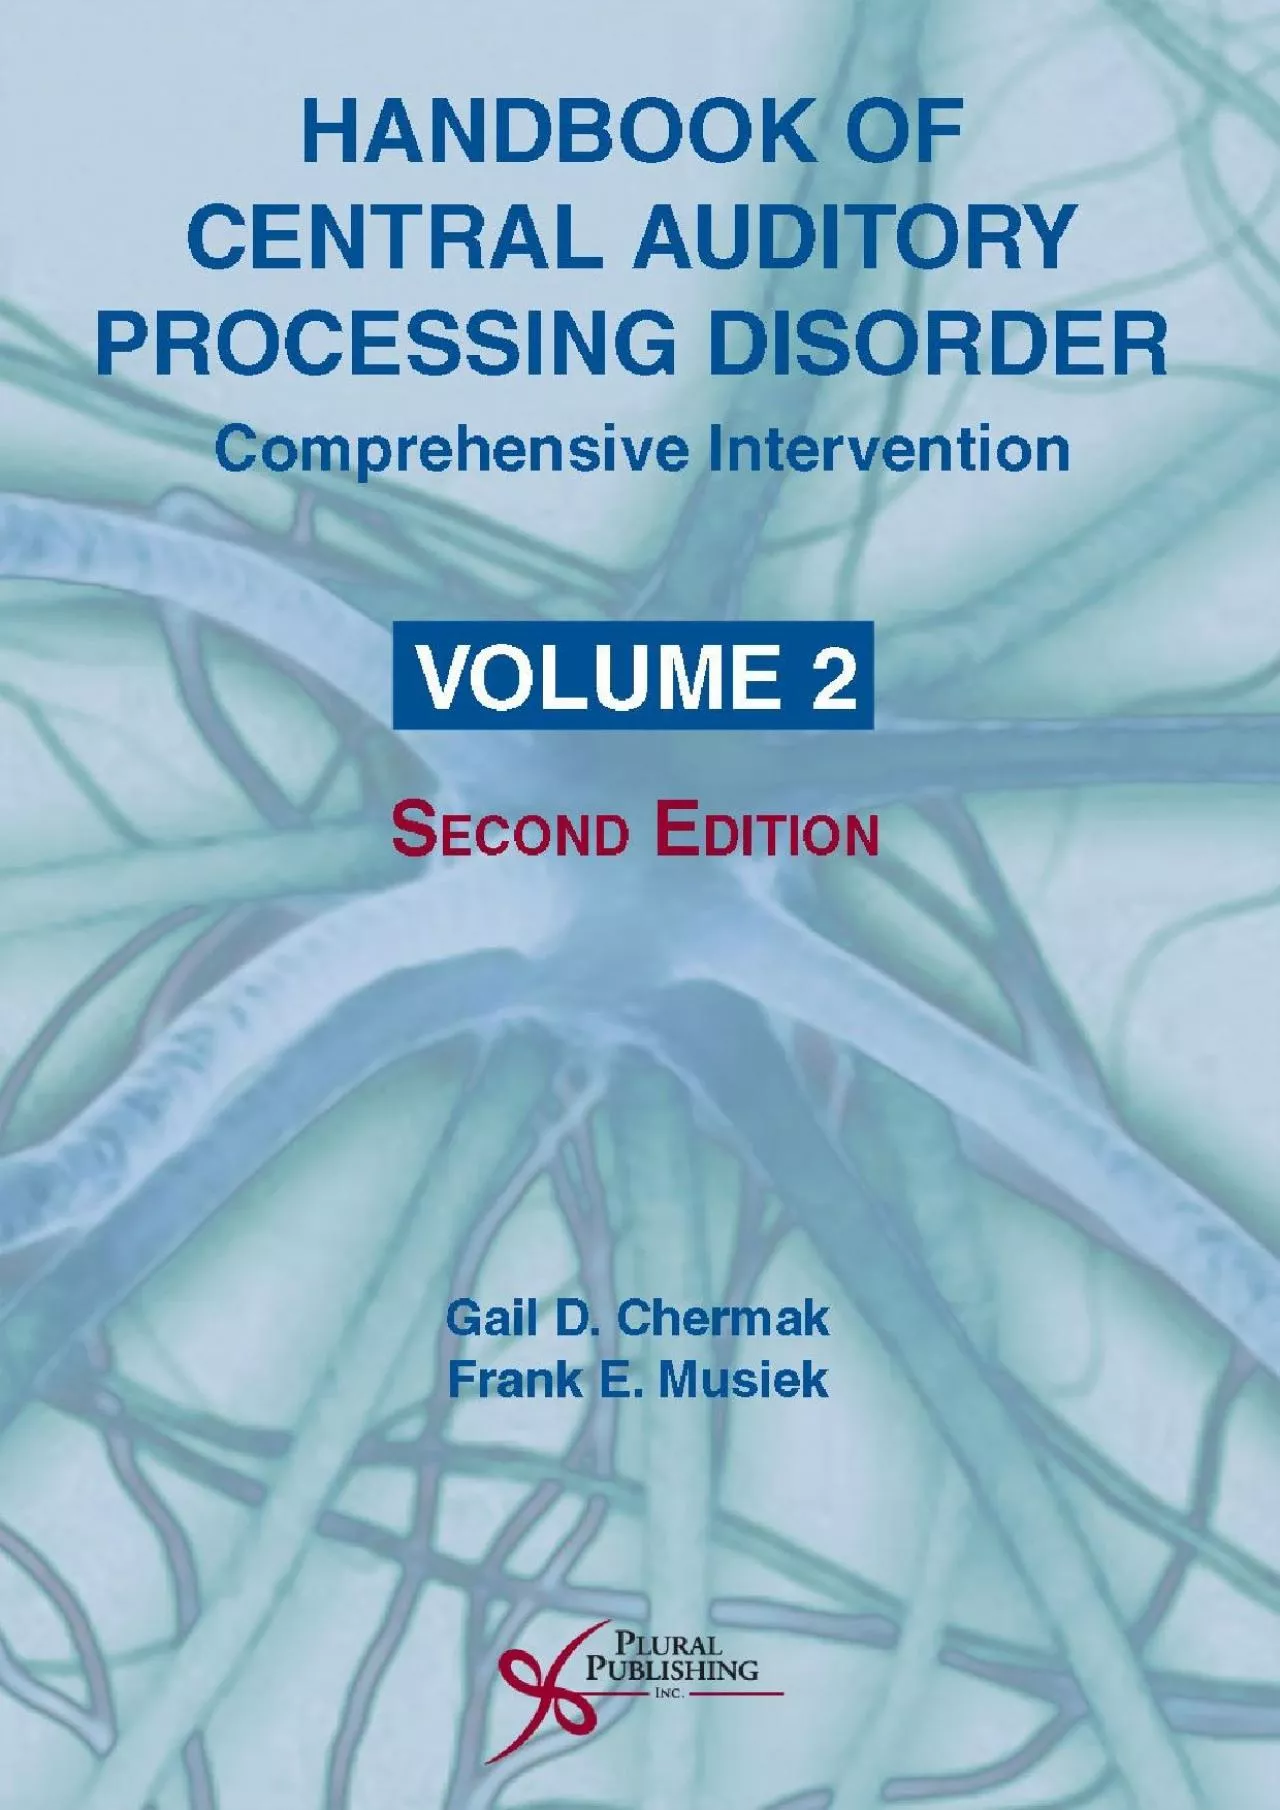 (BOOK)-Handbook of Central Auditory Processing Disorder, Volume II: Comprehensive Intervention